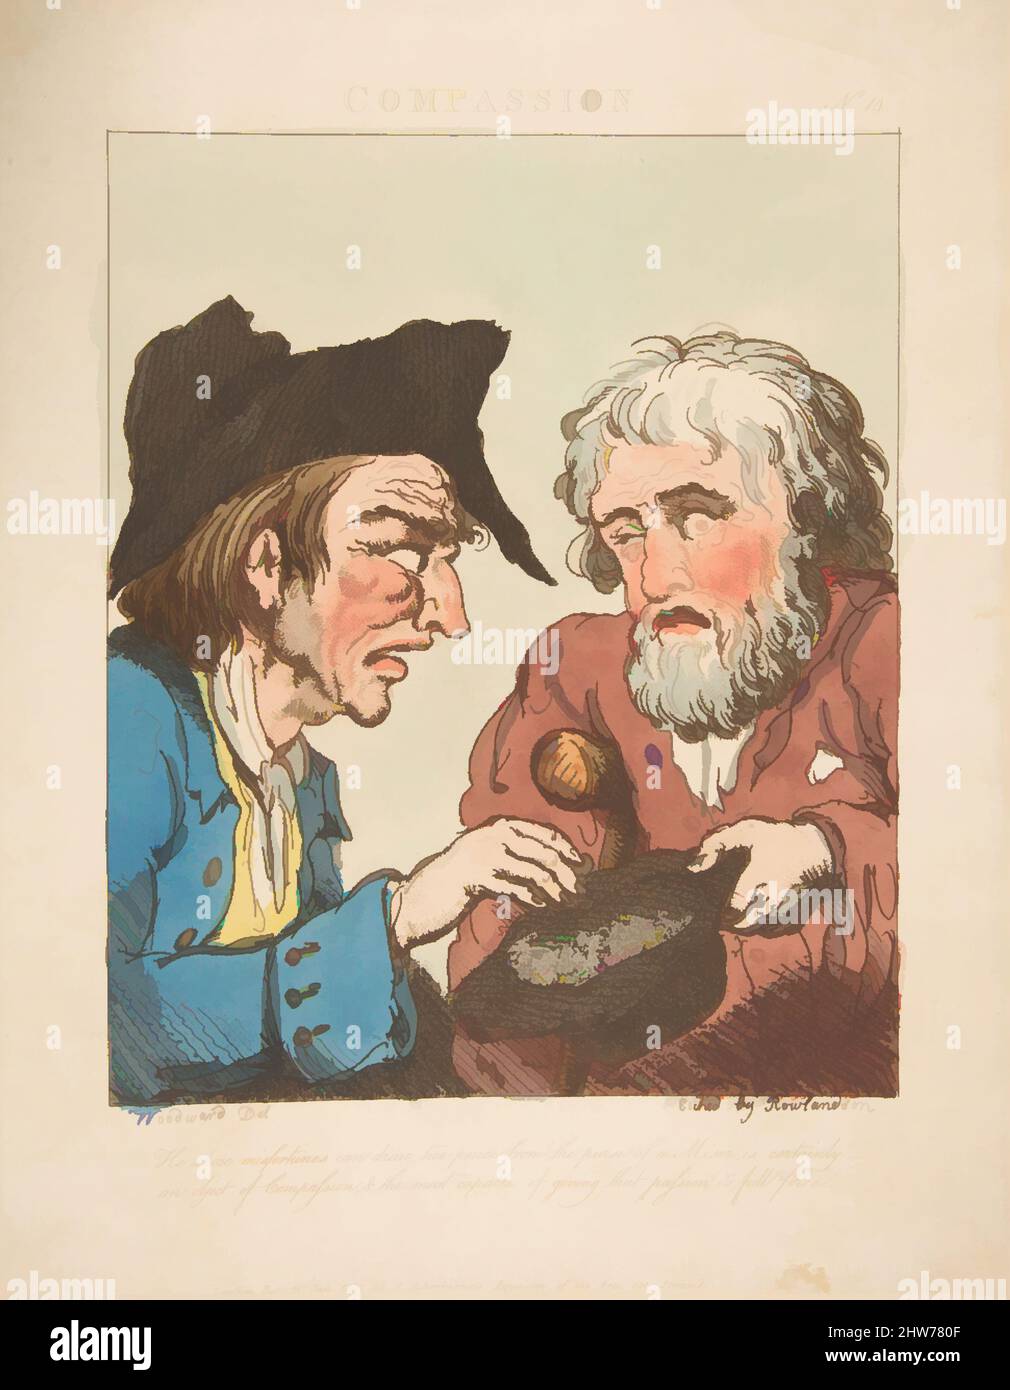 Art inspired by Compassion (Le Brun Travested, or Caricatures of the Passions), January 21, 1800, Hand-colored etching, printed in brown ink, sheet: 11 7/16 x 8 13/16 in. (29 x 22.4 cm), Prints, After George Moutard Woodward (British, ca. 1760–1809 London, Classic works modernized by Artotop with a splash of modernity. Shapes, color and value, eye-catching visual impact on art. Emotions through freedom of artworks in a contemporary way. A timeless message pursuing a wildly creative new direction. Artists turning to the digital medium and creating the Artotop NFT Stock Photo